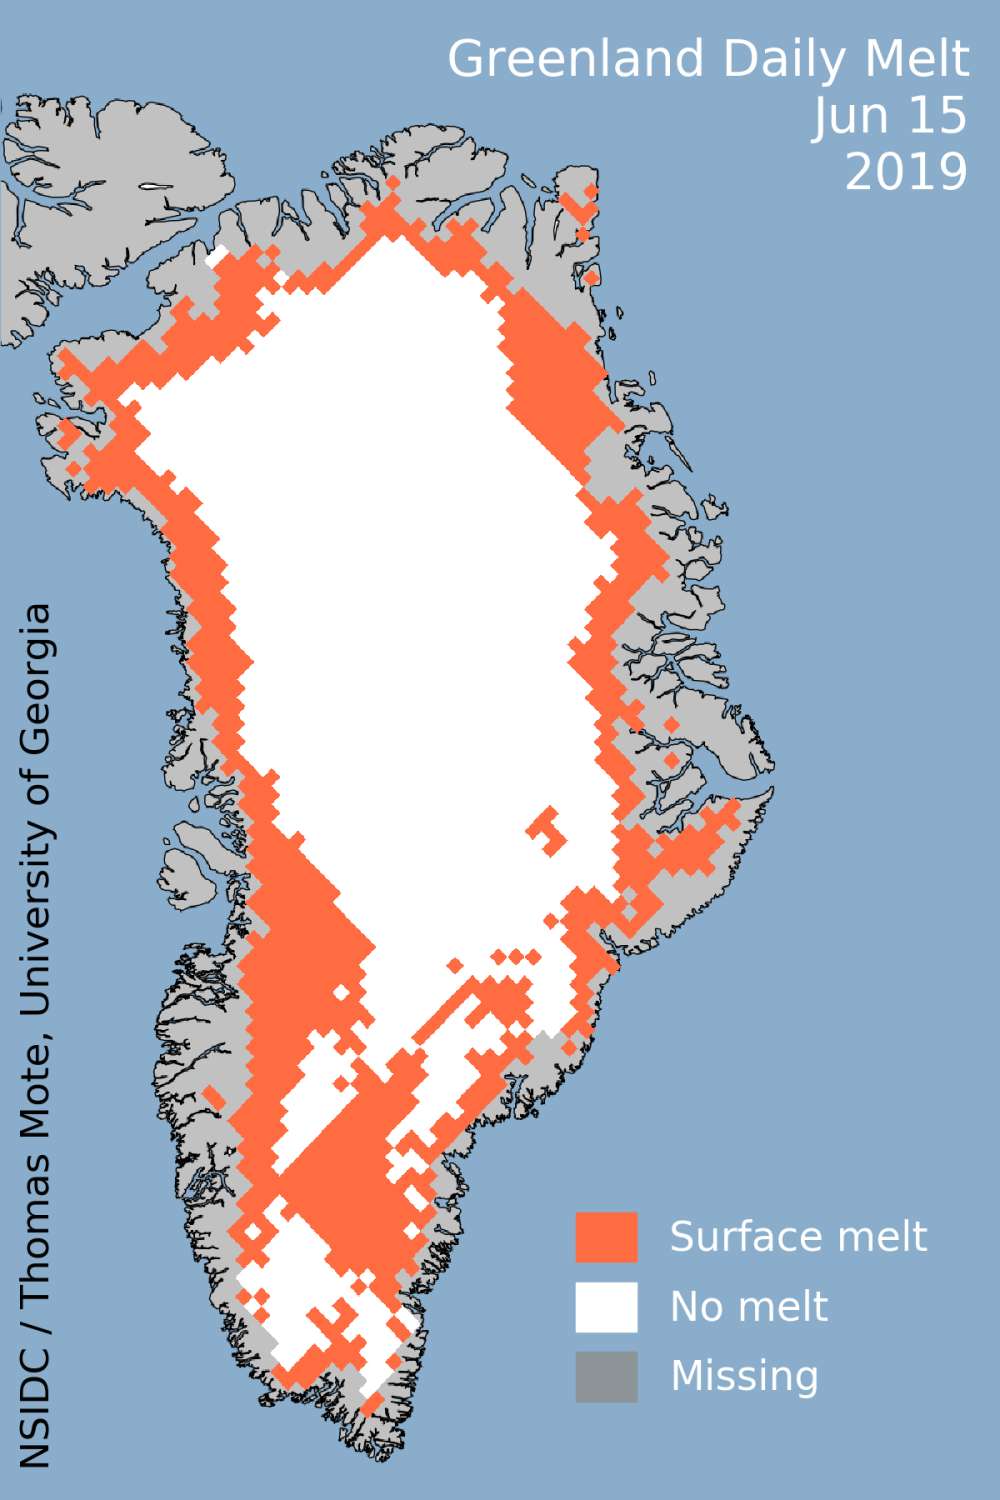 content-1560764948-greenland-daily-melt